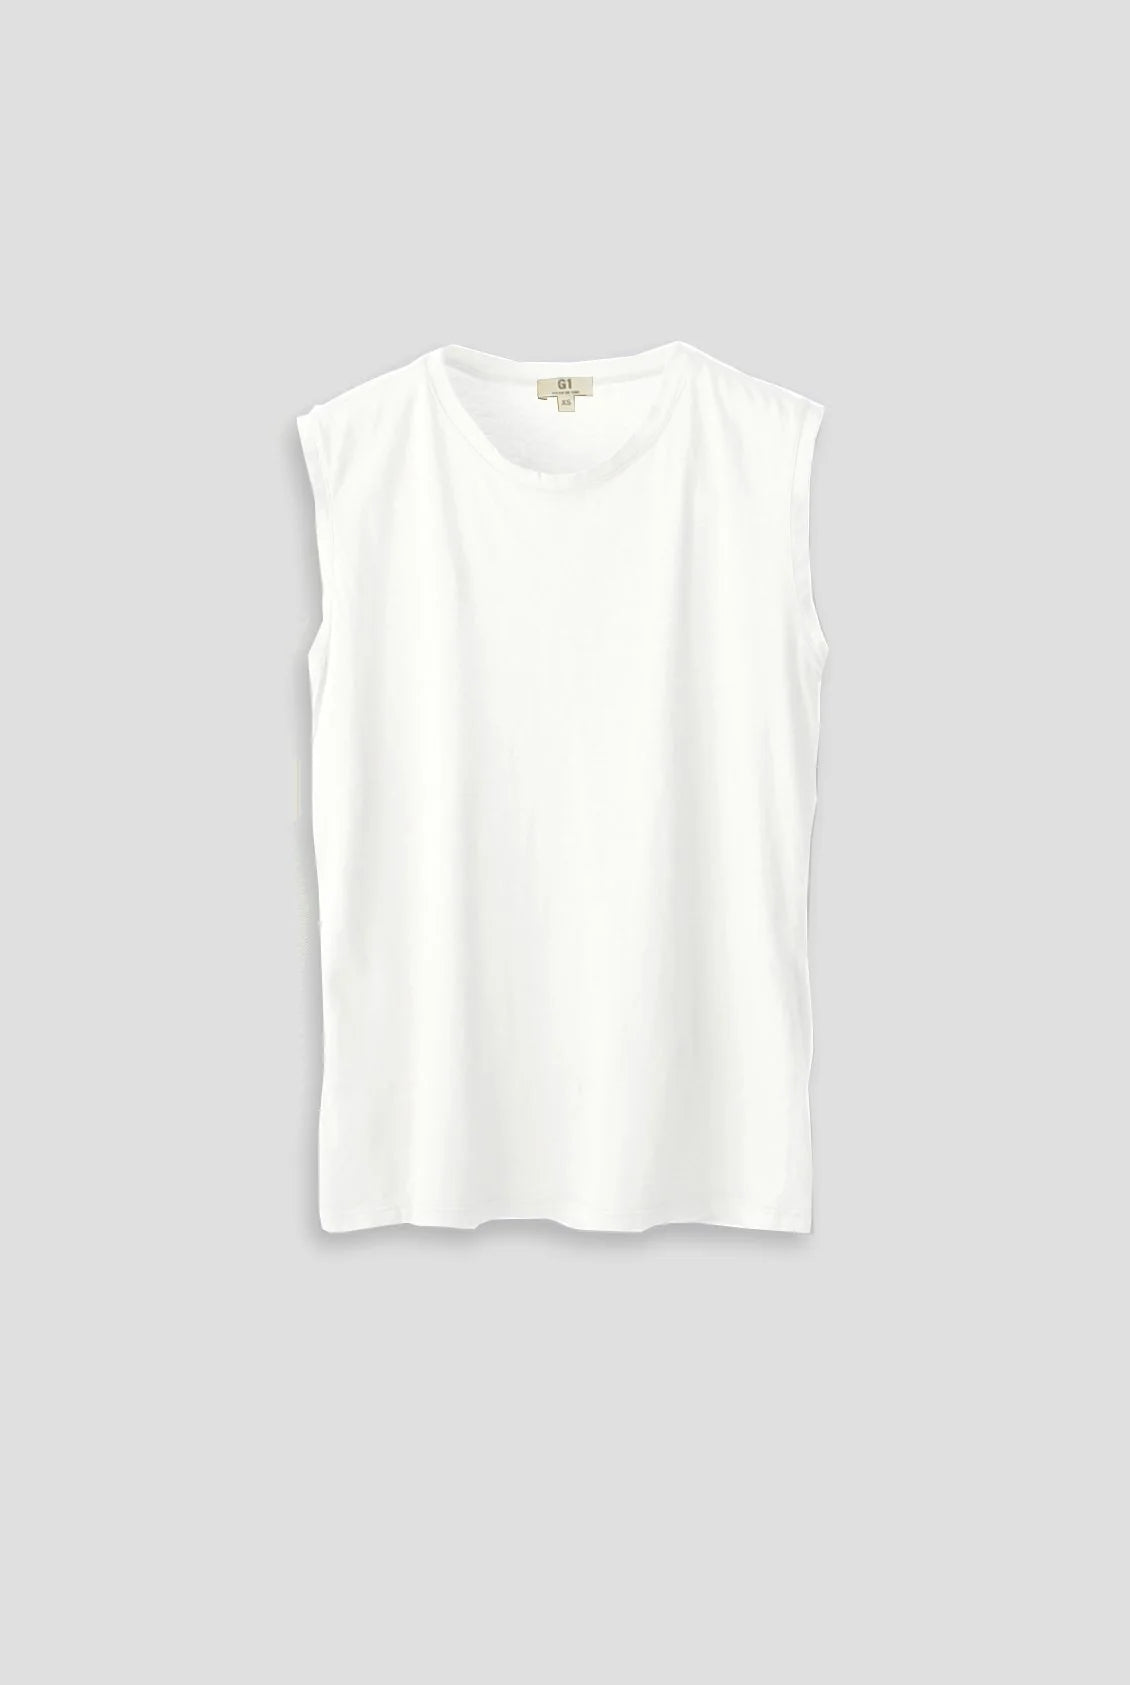 MUSCLE TANK IN WHITE - Romi Boutique